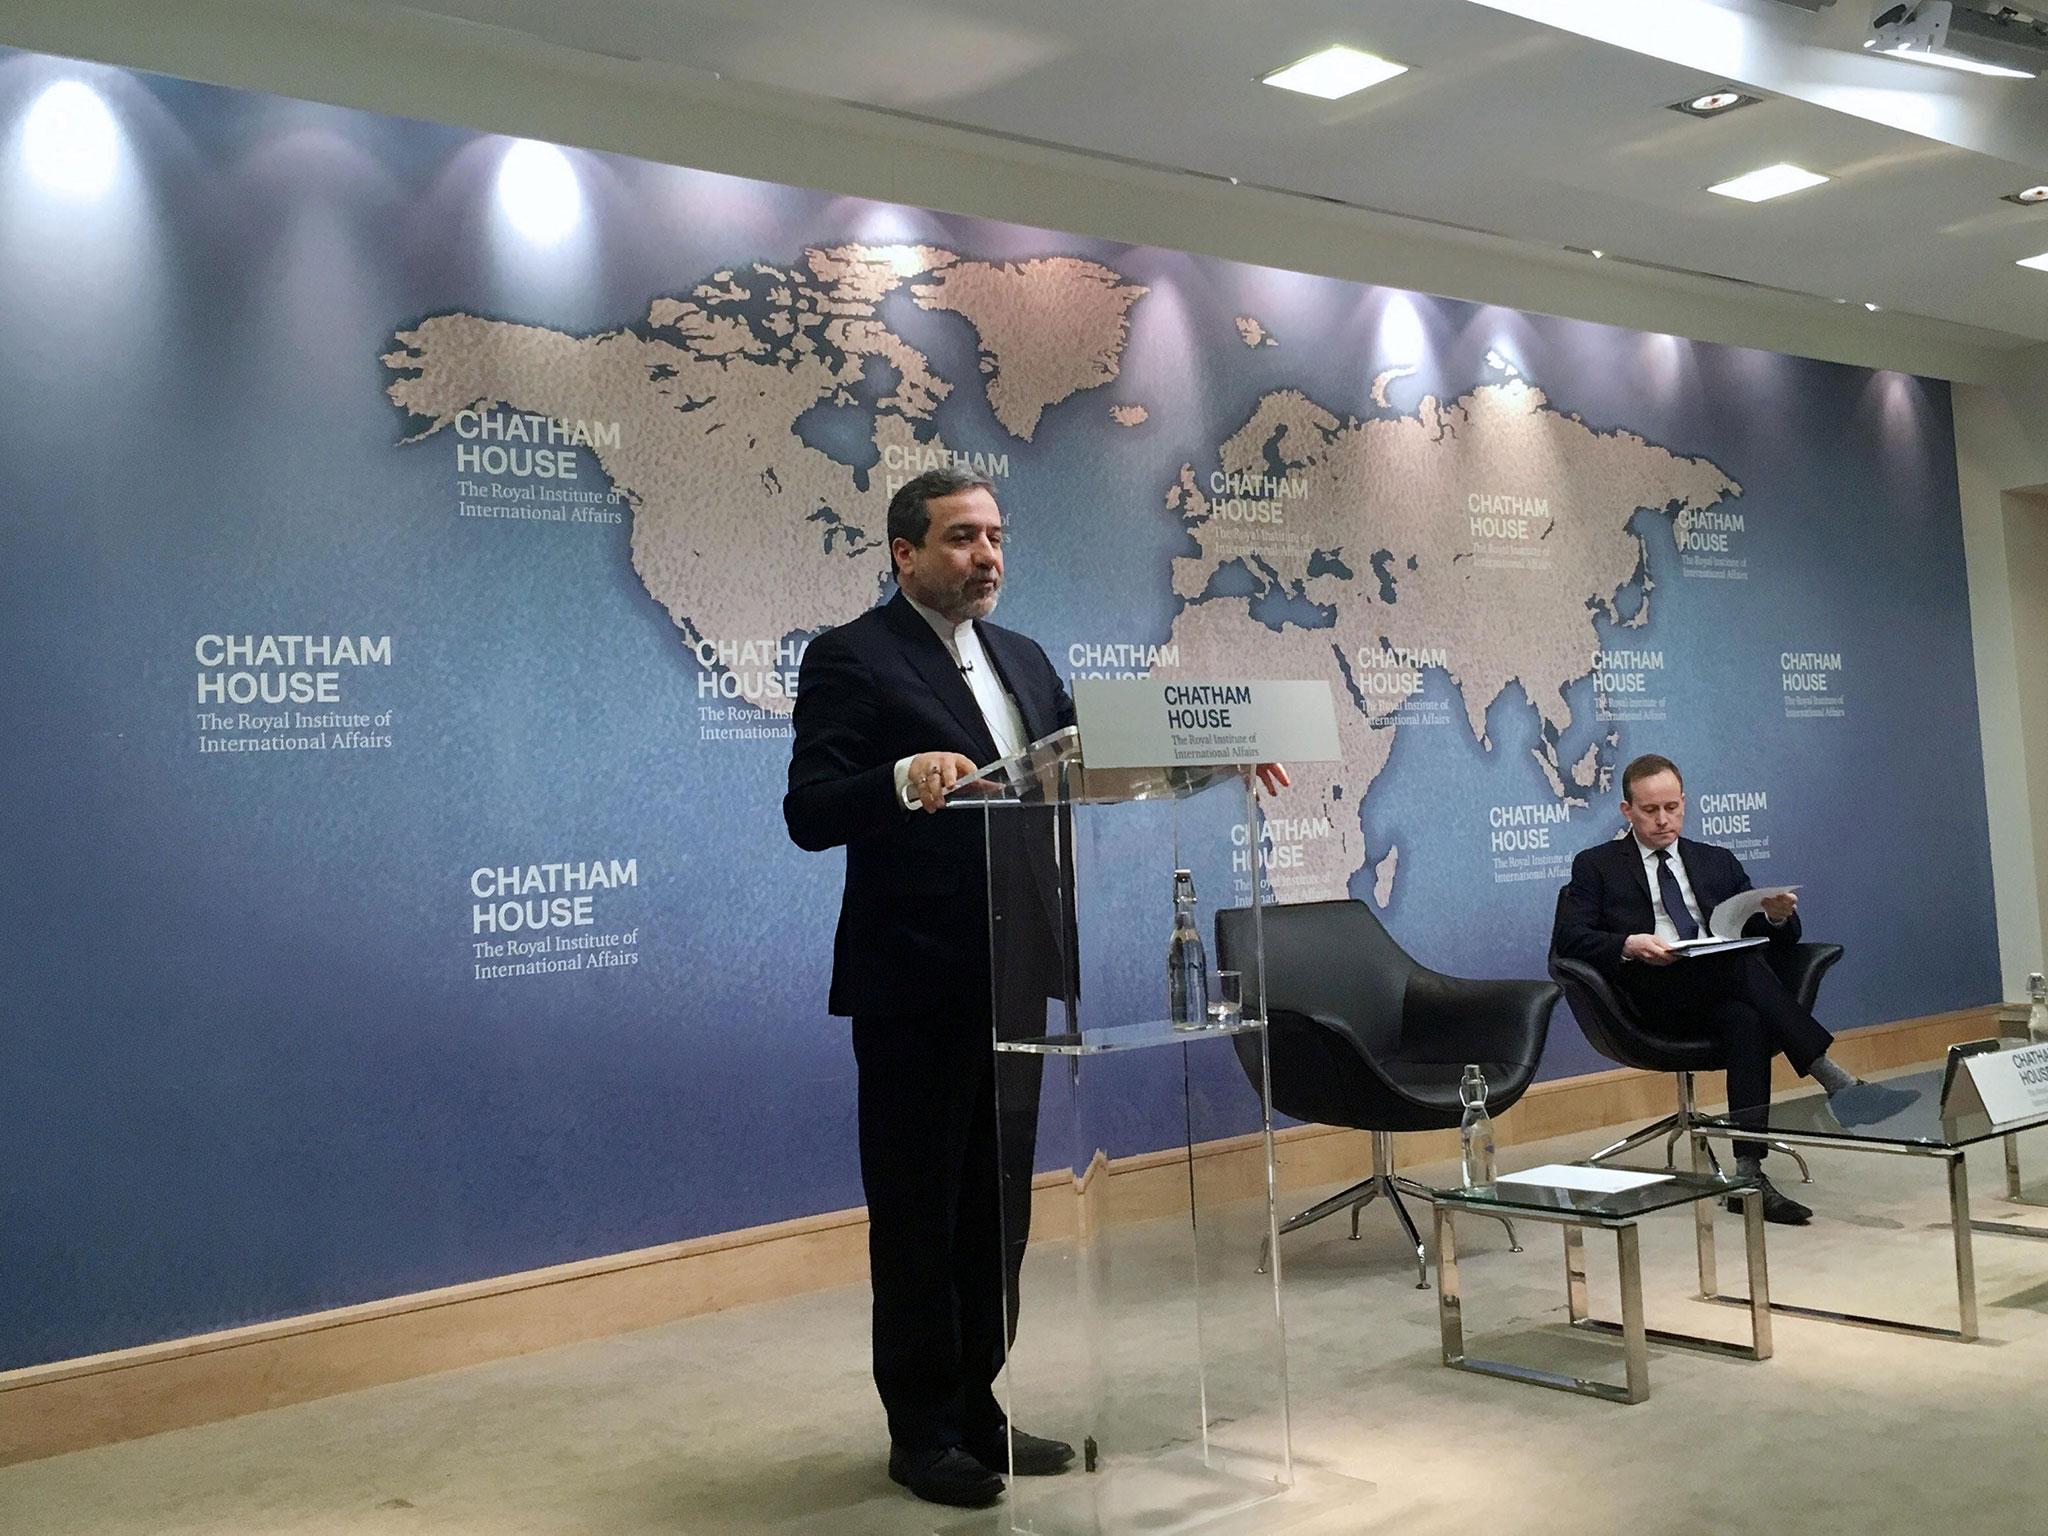 Iran's Deputy Foreign Minister Abbas Araqchi speaking at the Chatham House think tank in London